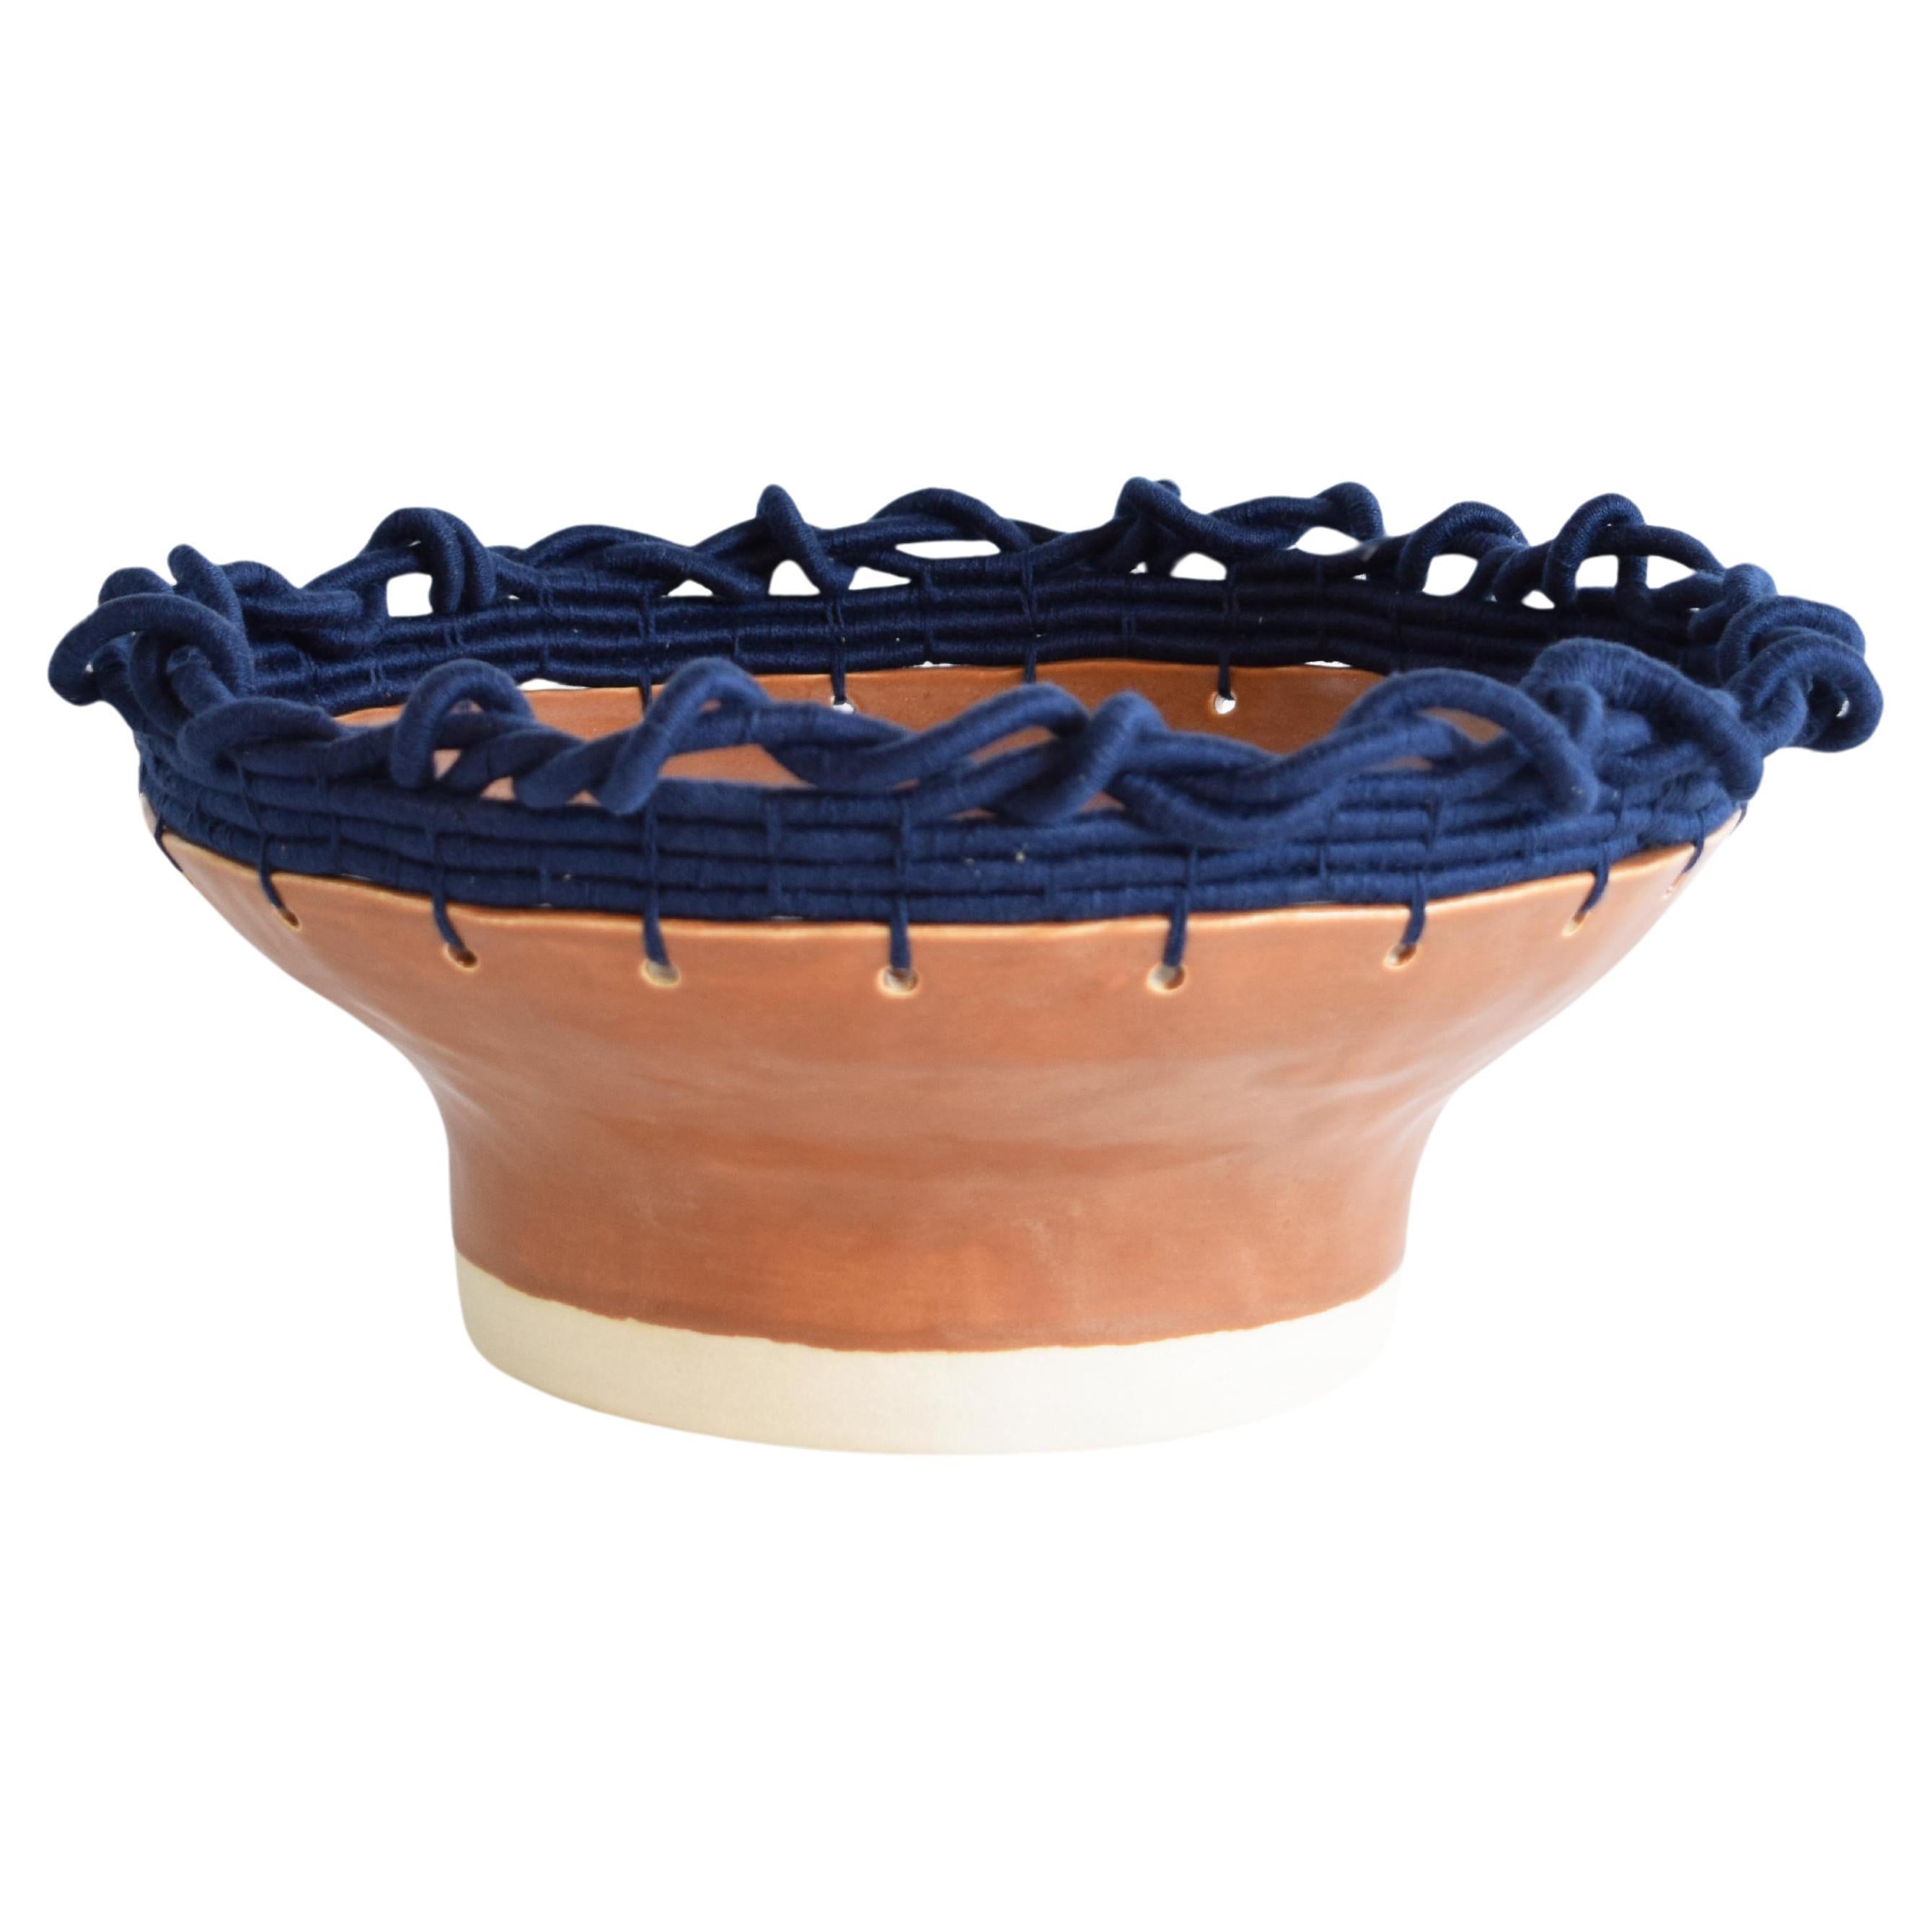 Cotton Bowls and Baskets